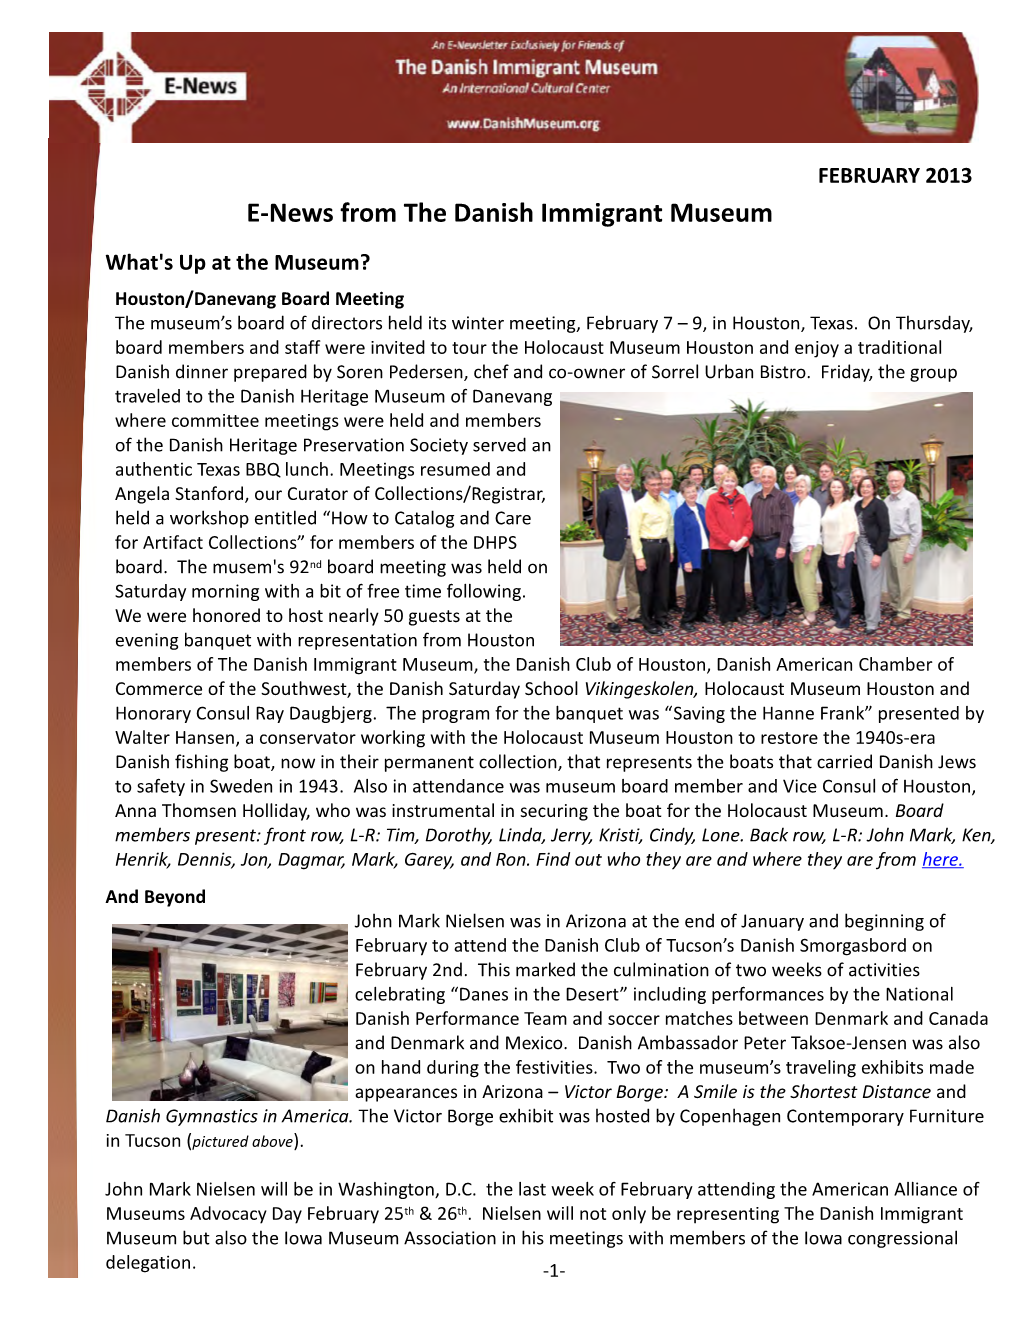 E-News from the Danish Immigrant Museum